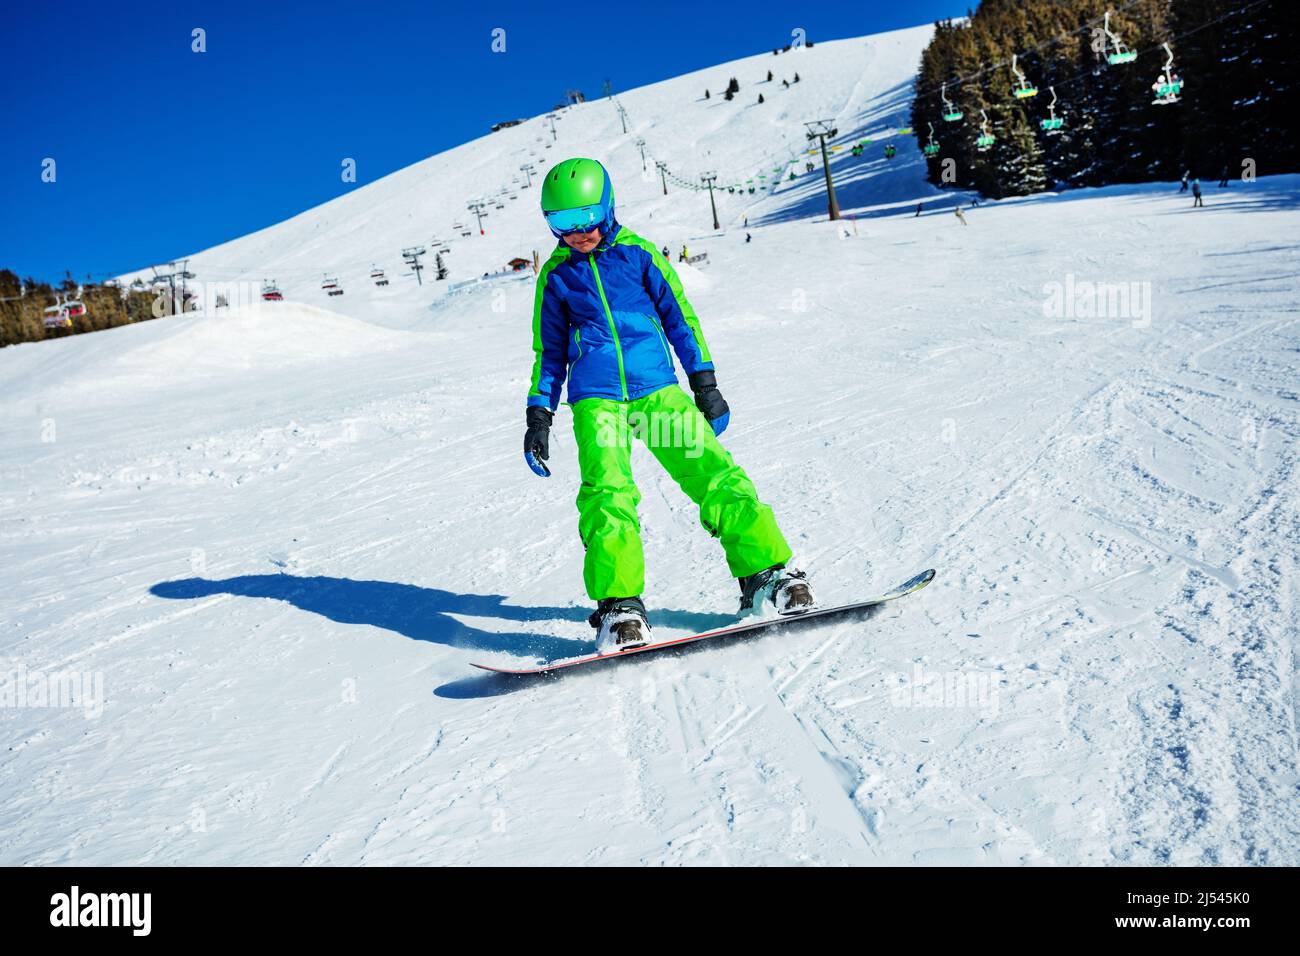 Action photo of a snowboarder boy in motion on ski slope Stock Photo